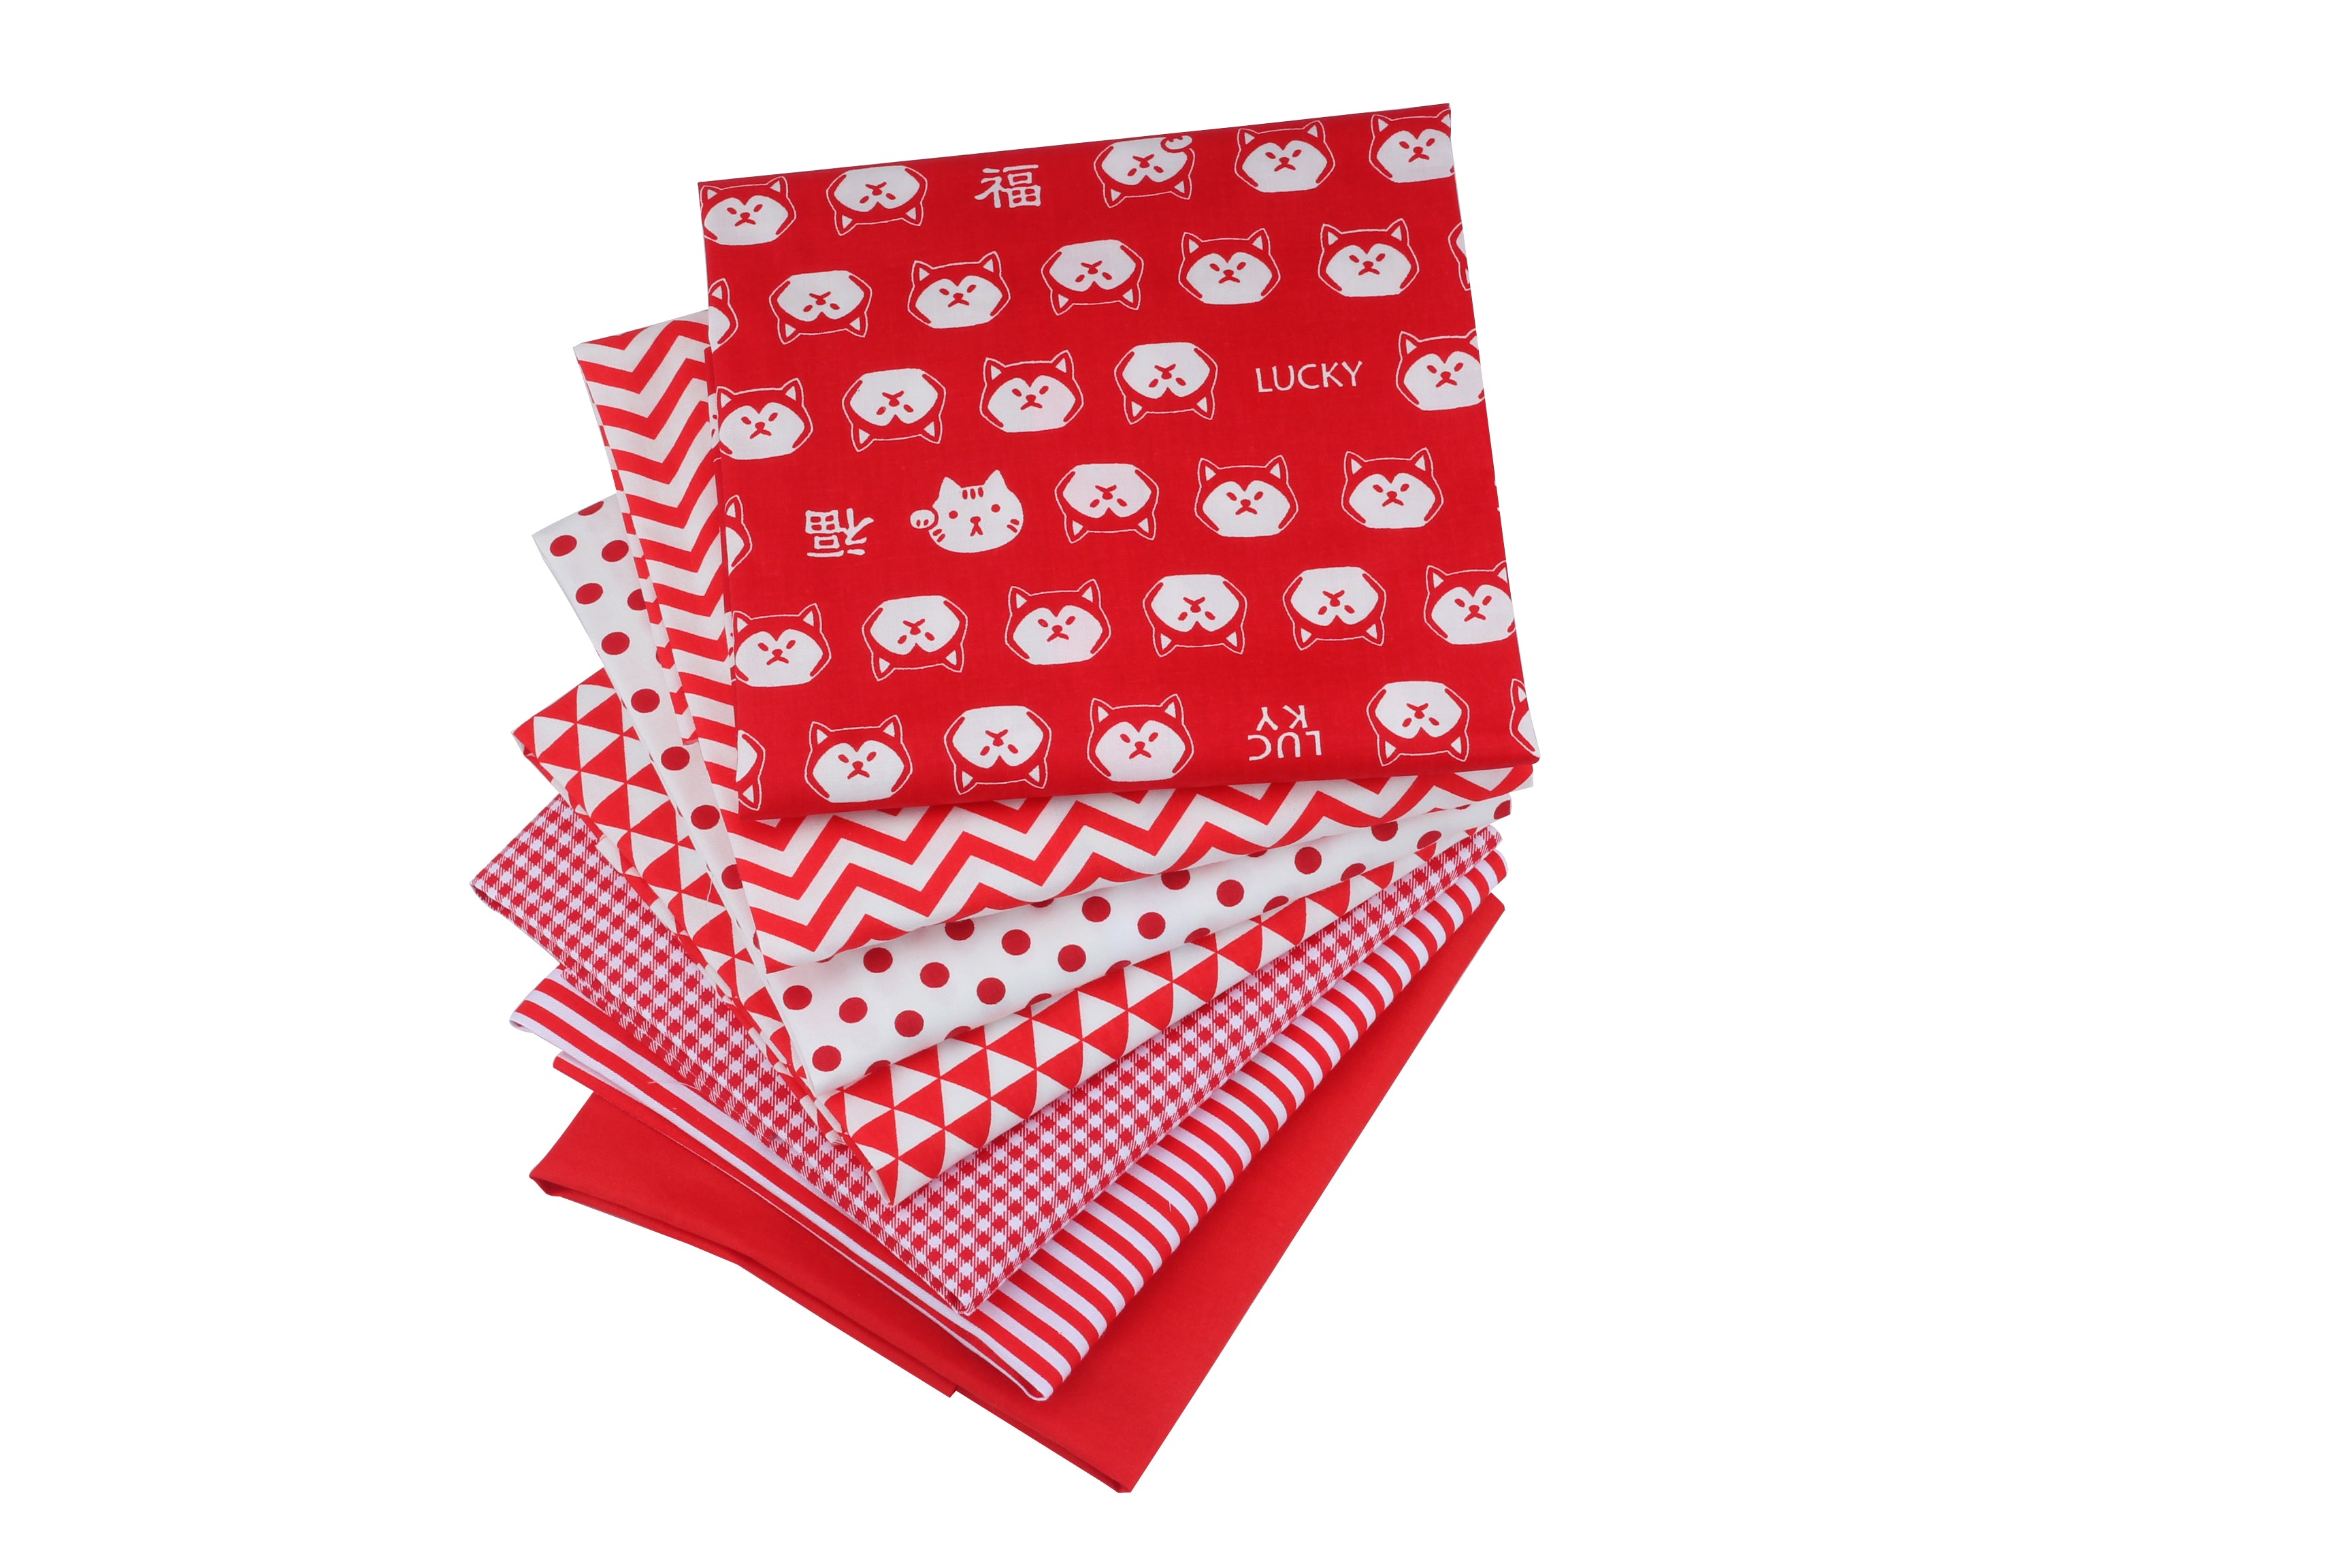 CraftsFabrics 7 pcs Red and White Printed Cotton Fat Quarters